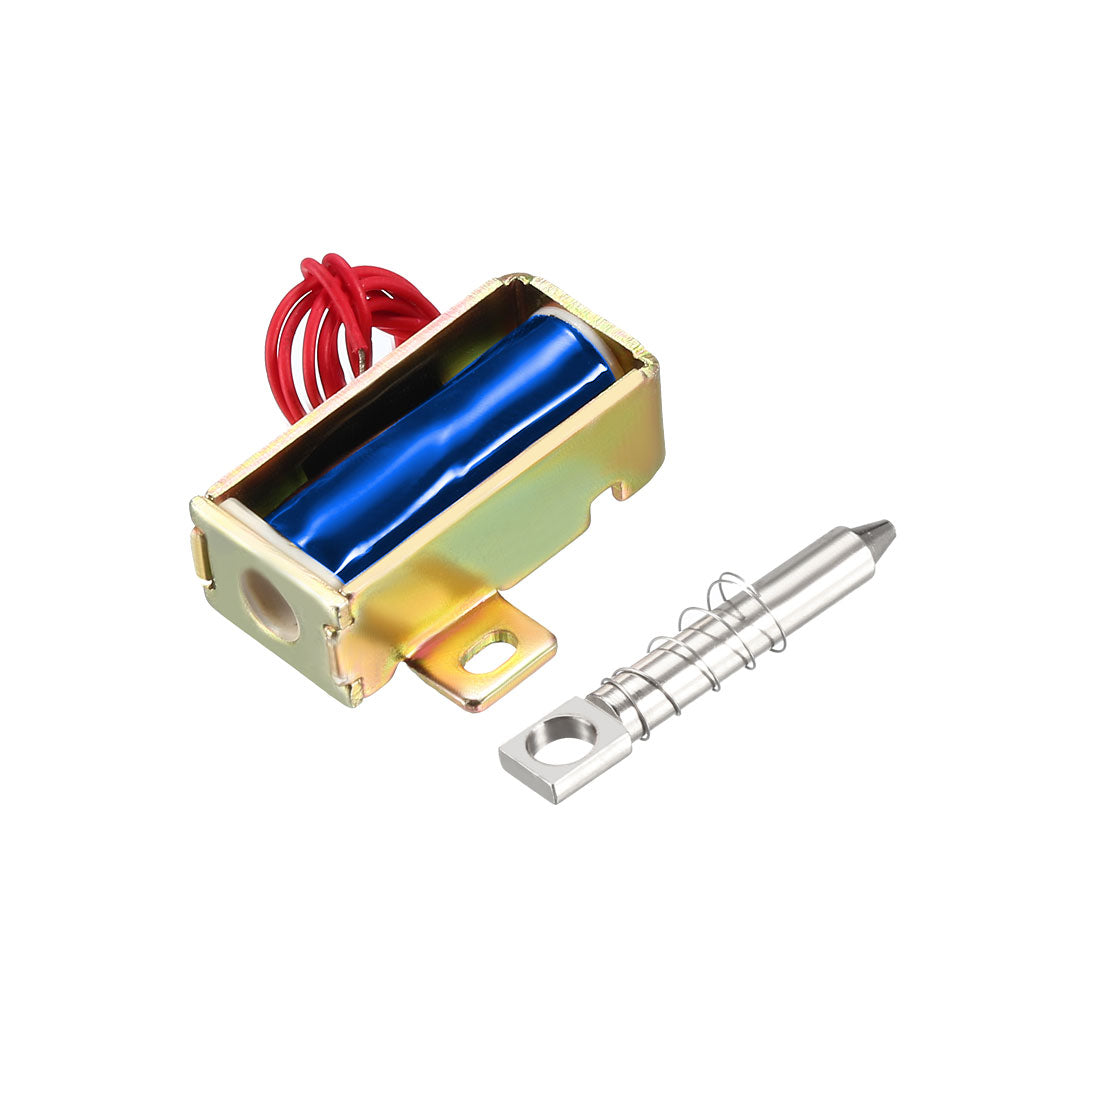 uxcell Uxcell DC 12V 2A 5mm Mini Electromagnetic Solenoid Lock Pull Type for Electirc Door Lock